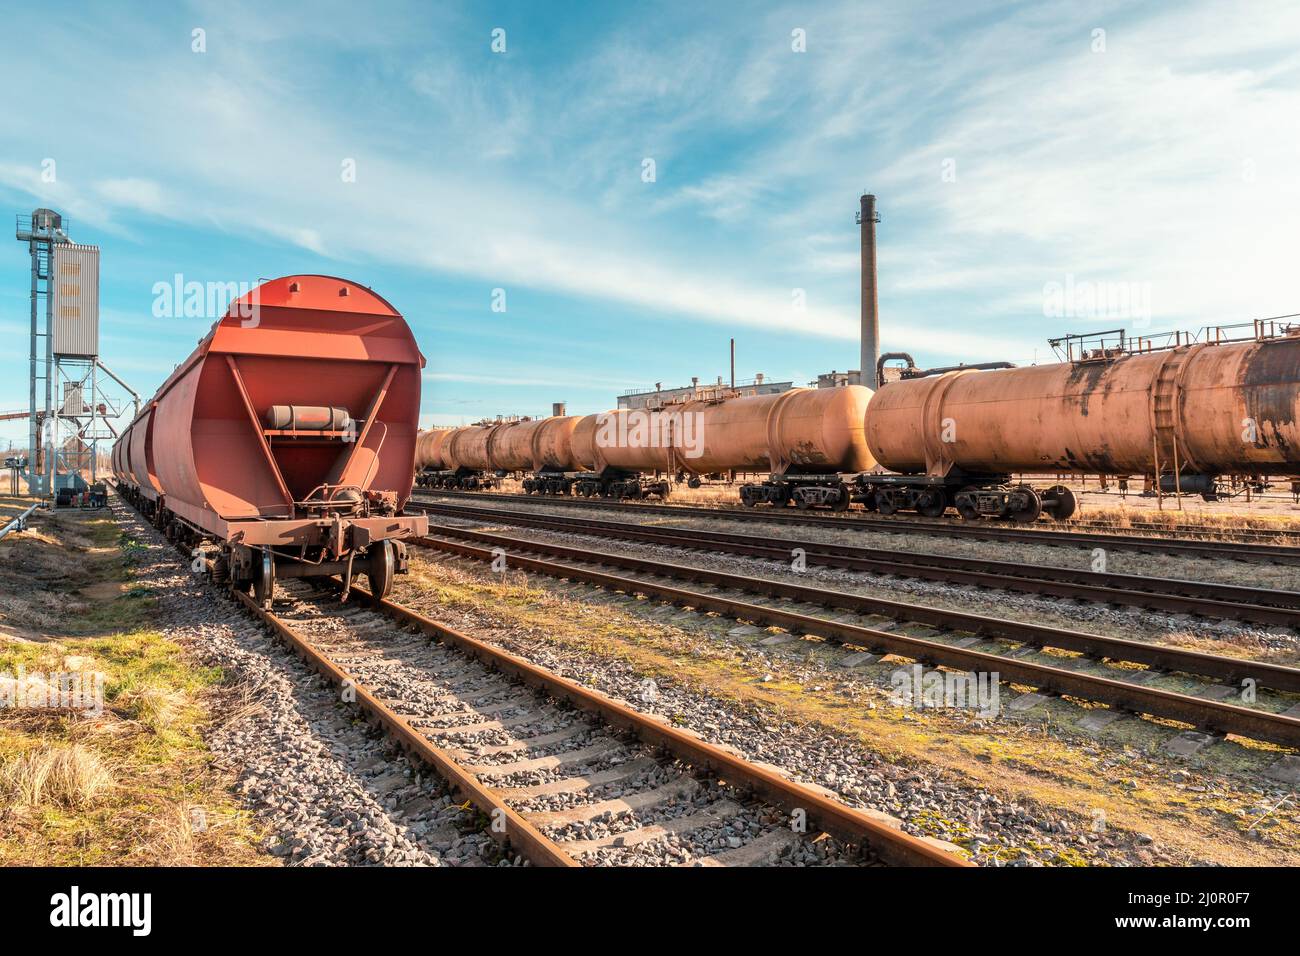 Railway Station with Freight Trains Stock Photo